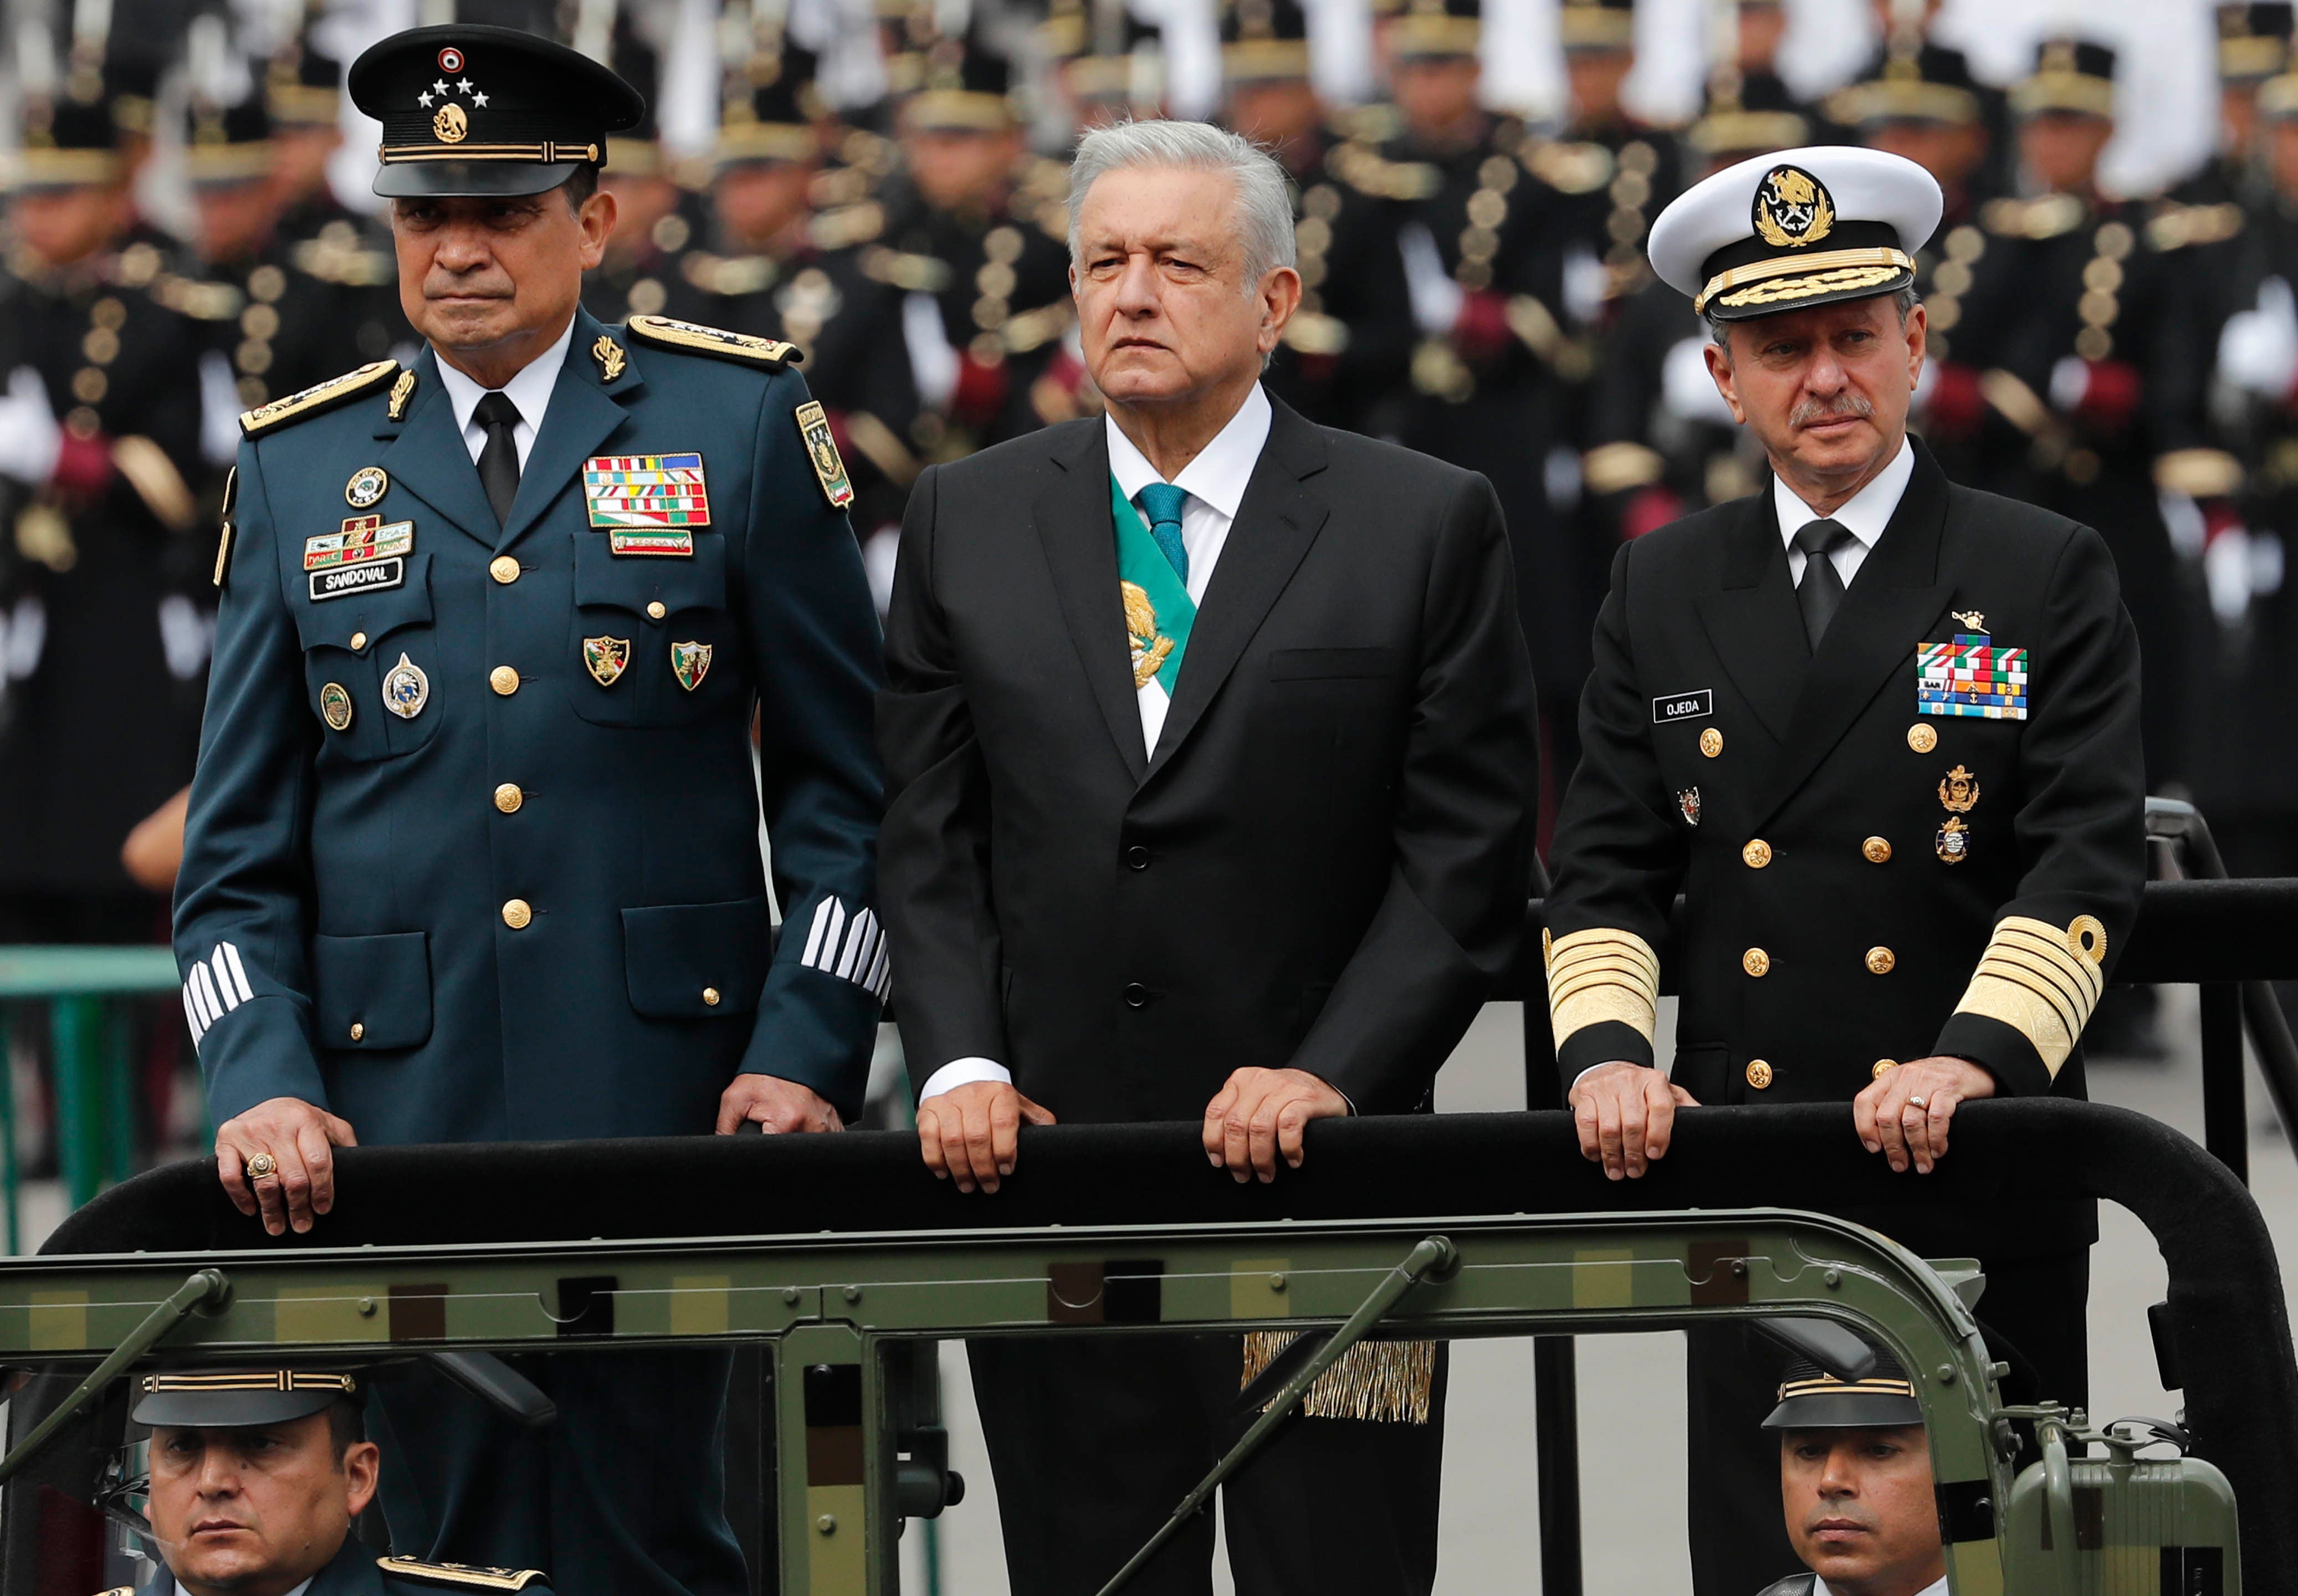 Mexican President Andres Manuel Lopez Obrador, center, stands with Secretary of Defense Luis Crescencio Sandoval, left, and Secretary of the Navy, Vidal Francisco Soberon, in an open military vehicle during the Independence Day military parade in the capital's main plaza, the Zocalo, in Mexico City. 